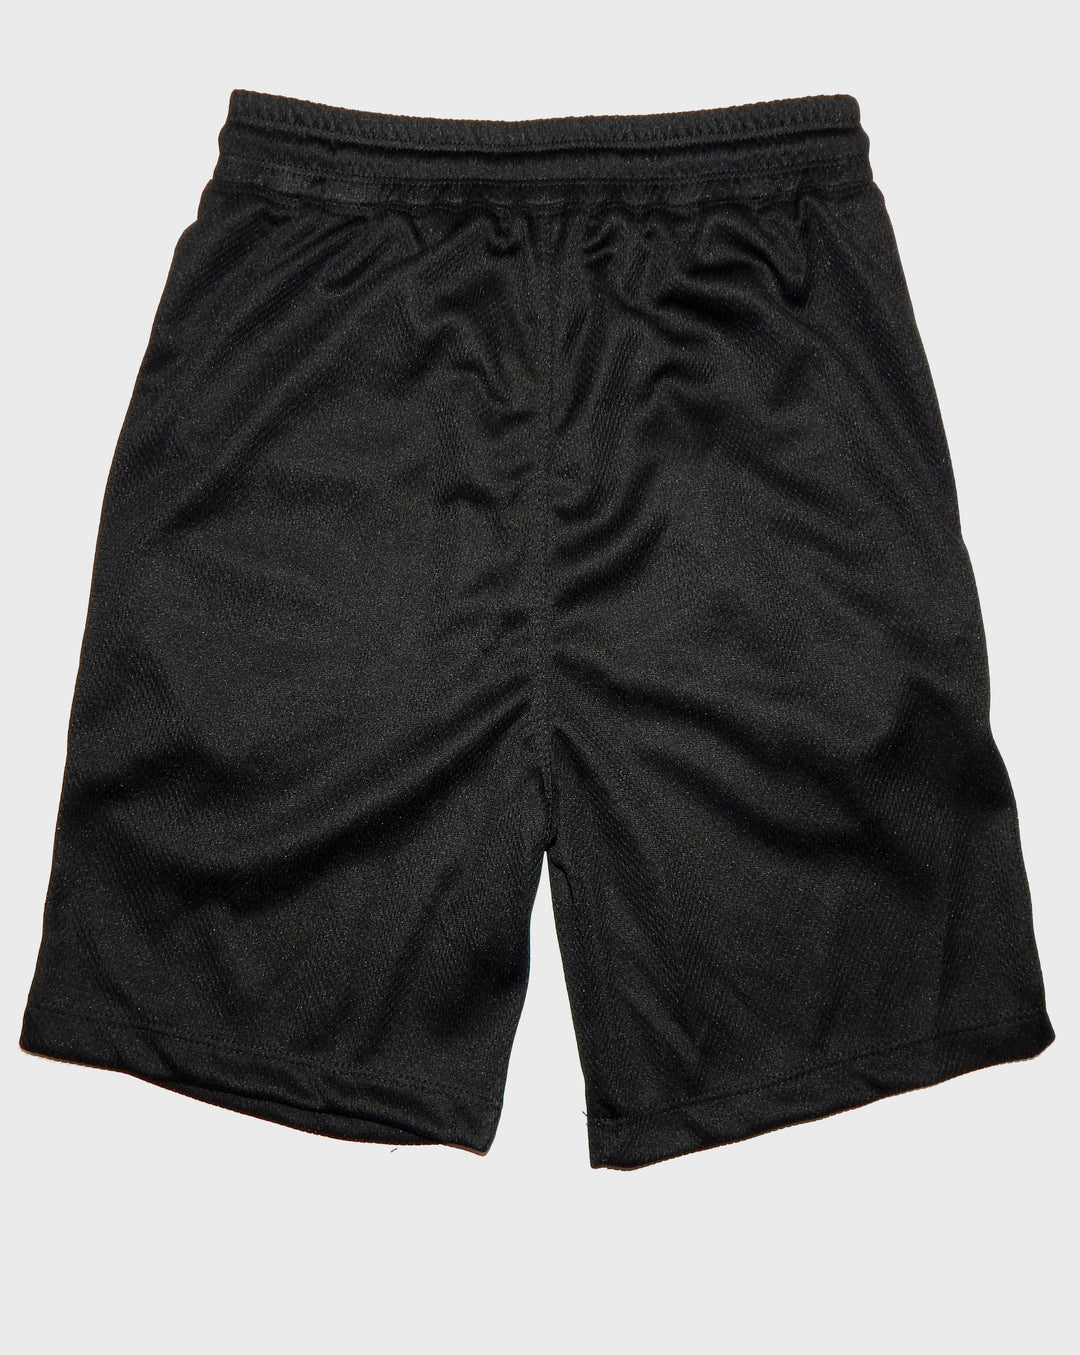 Solid Men Shorts For Training & Workout (Black) (Pack of 1)